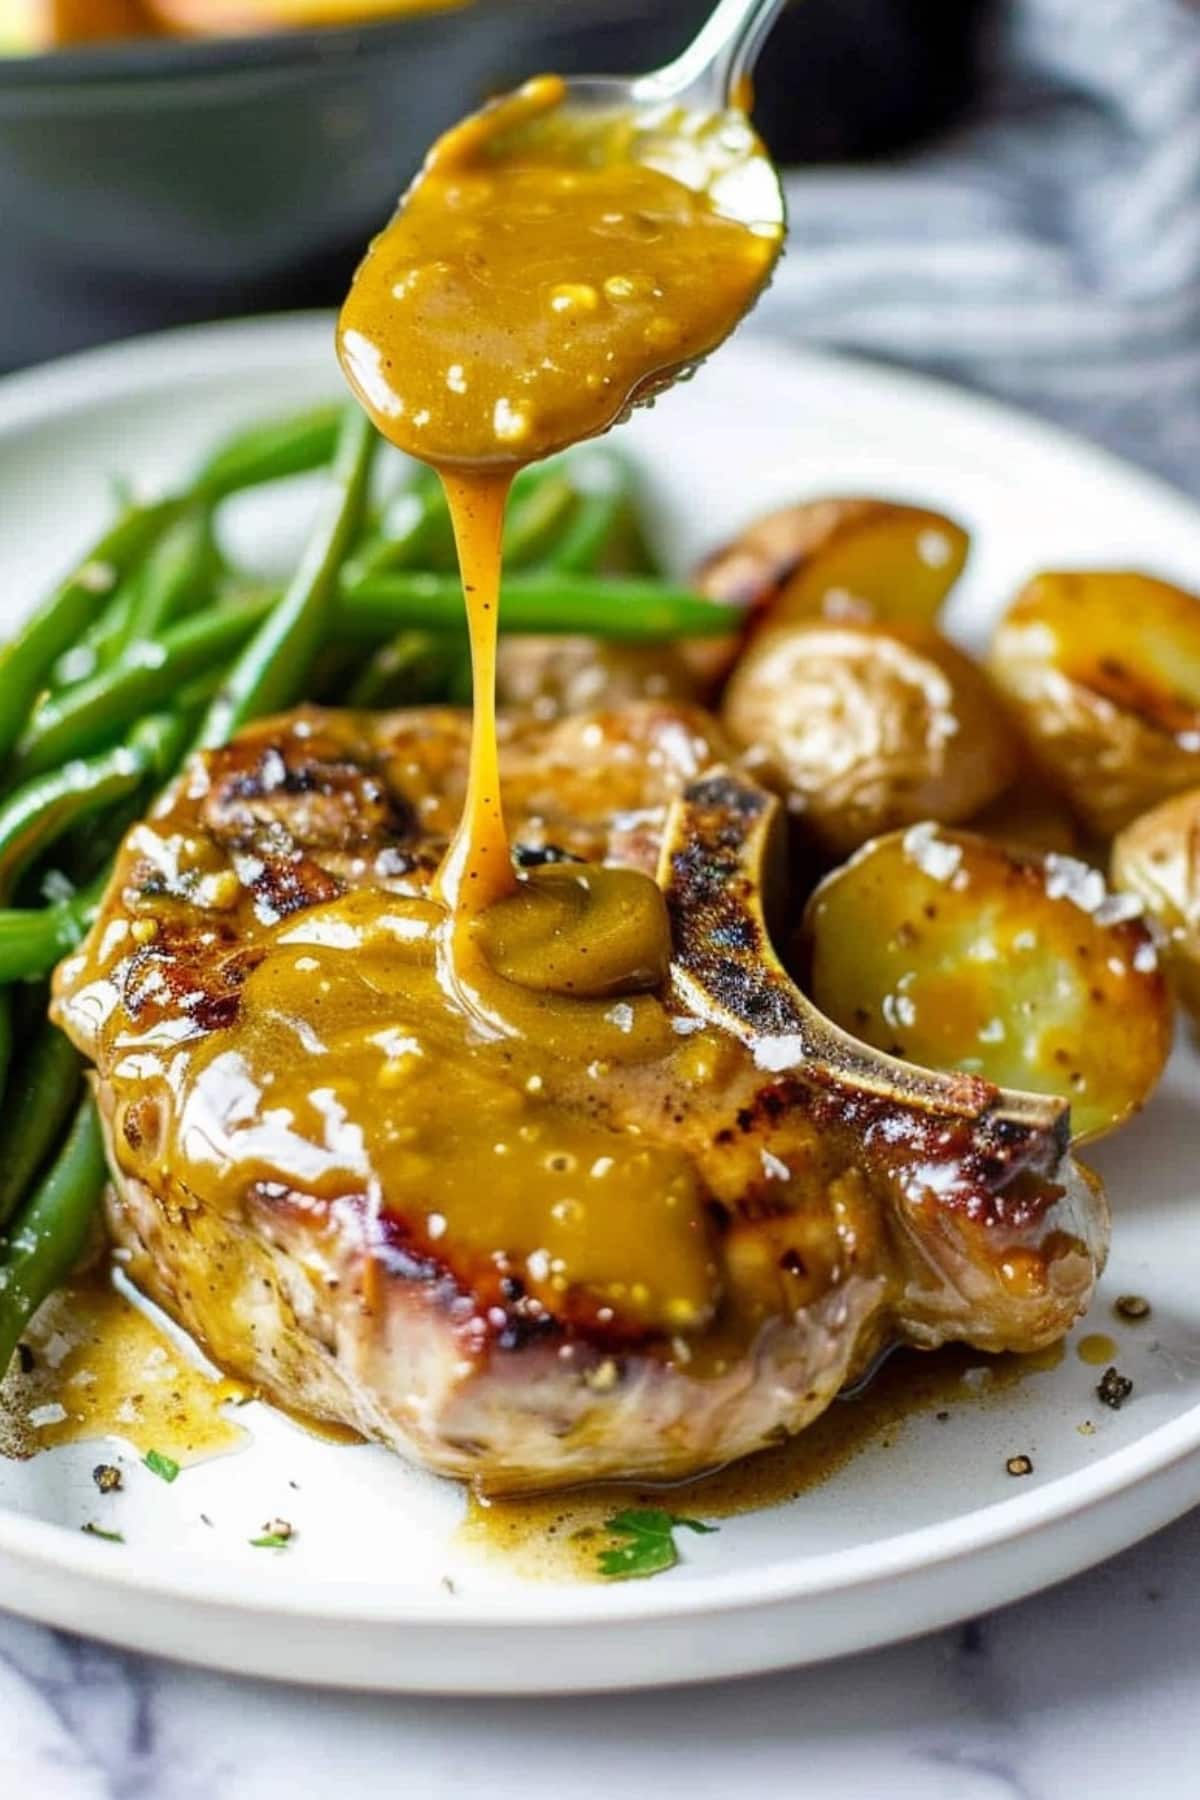 Honey mustard sauce dripping on pork chop with beans and potatoes on the side.